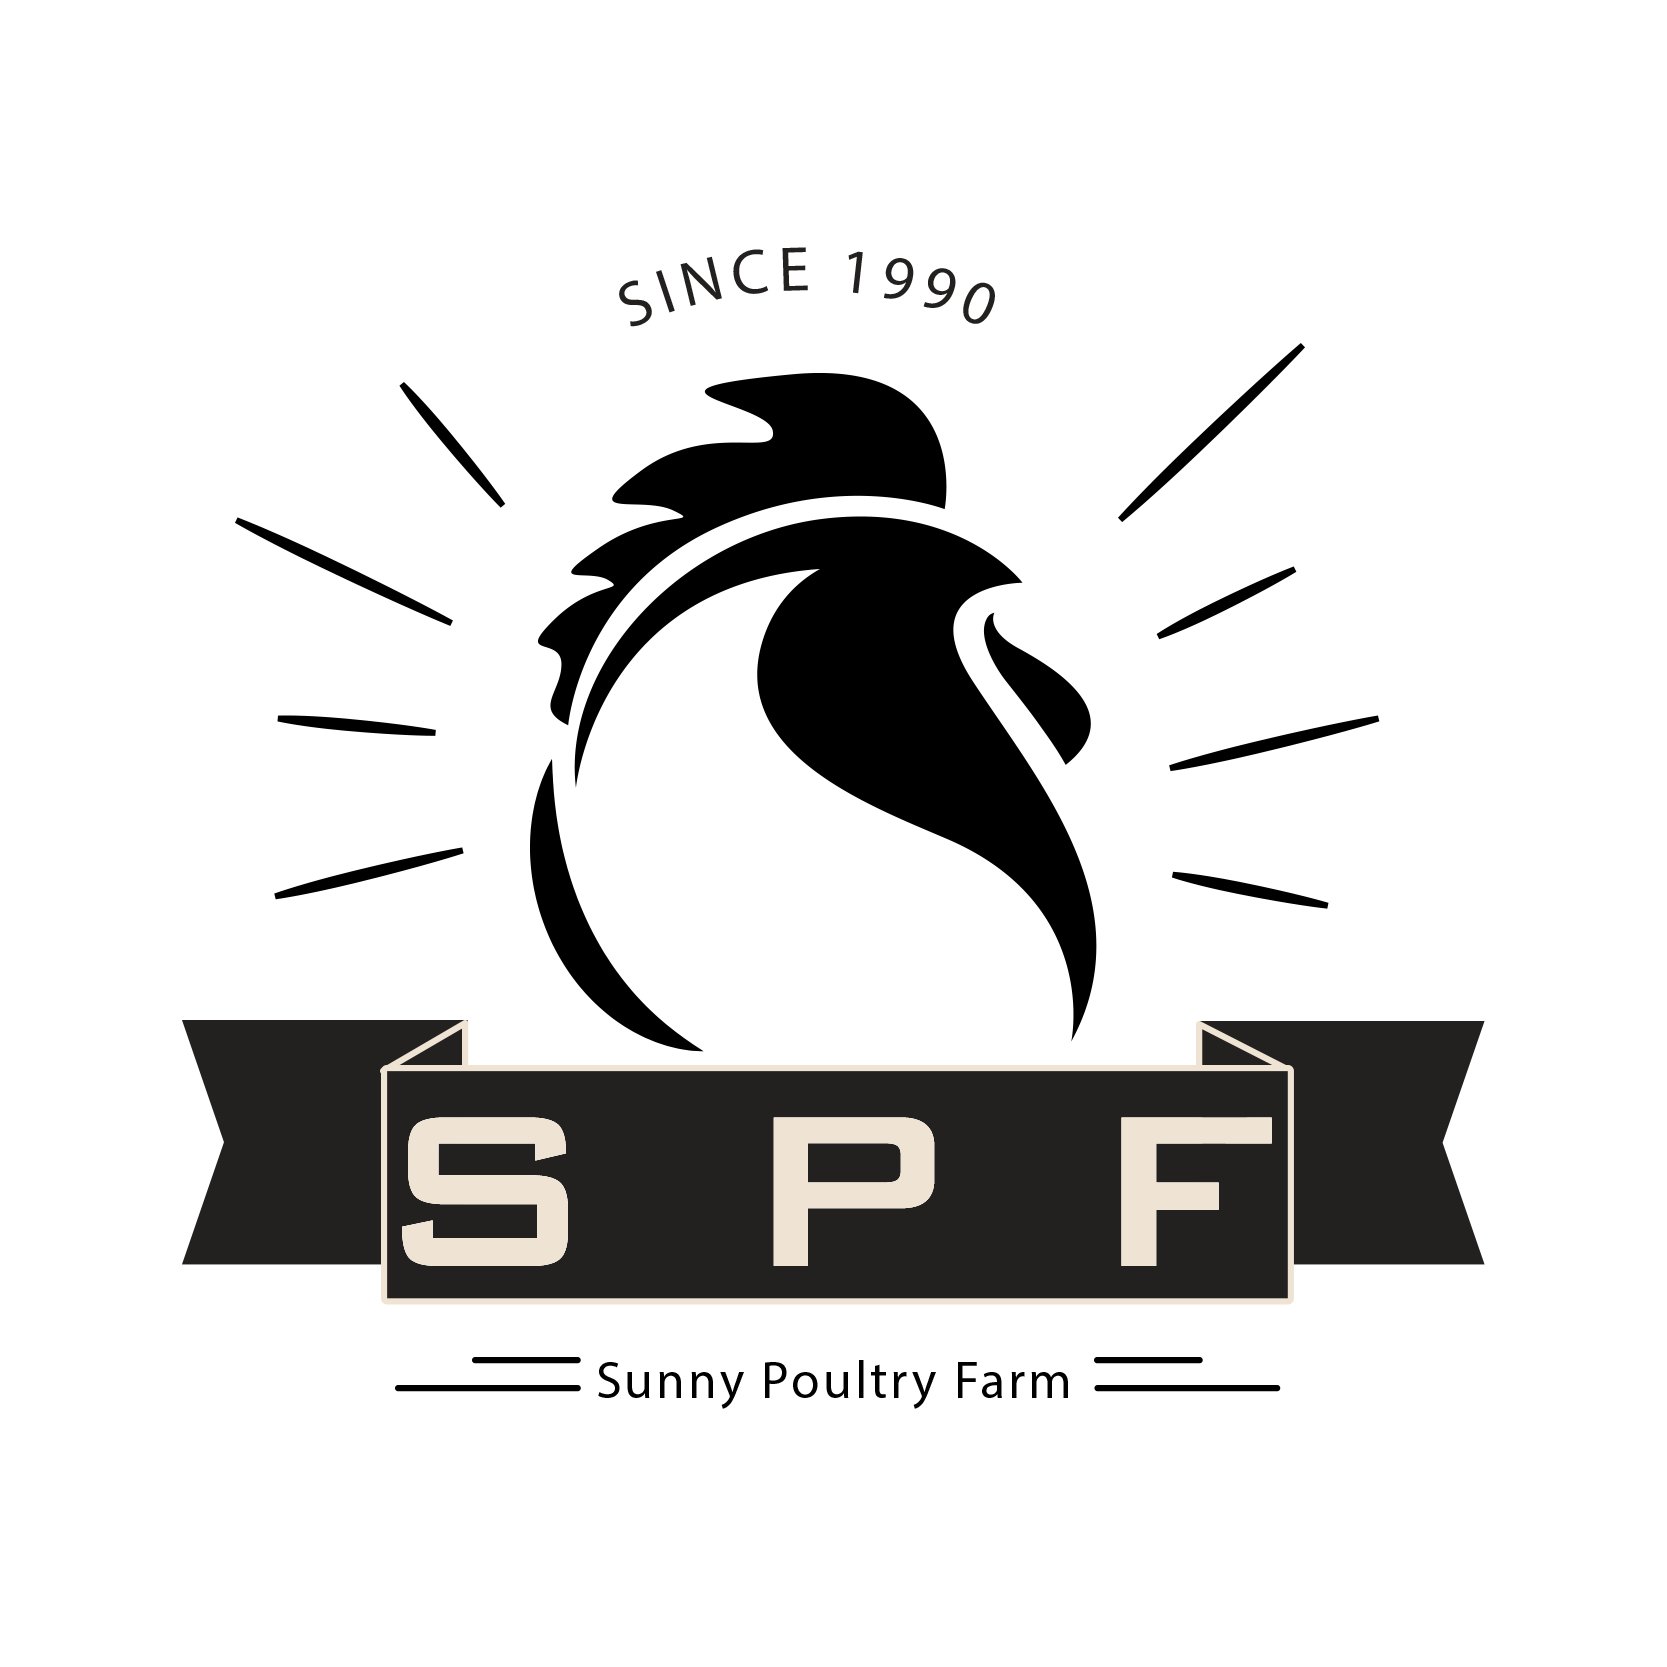 FASTEST GROWING YOUTUBE CHANNEL ABOUT POULTRY IN INDIA
SPF SUNNY POULTRY FARM